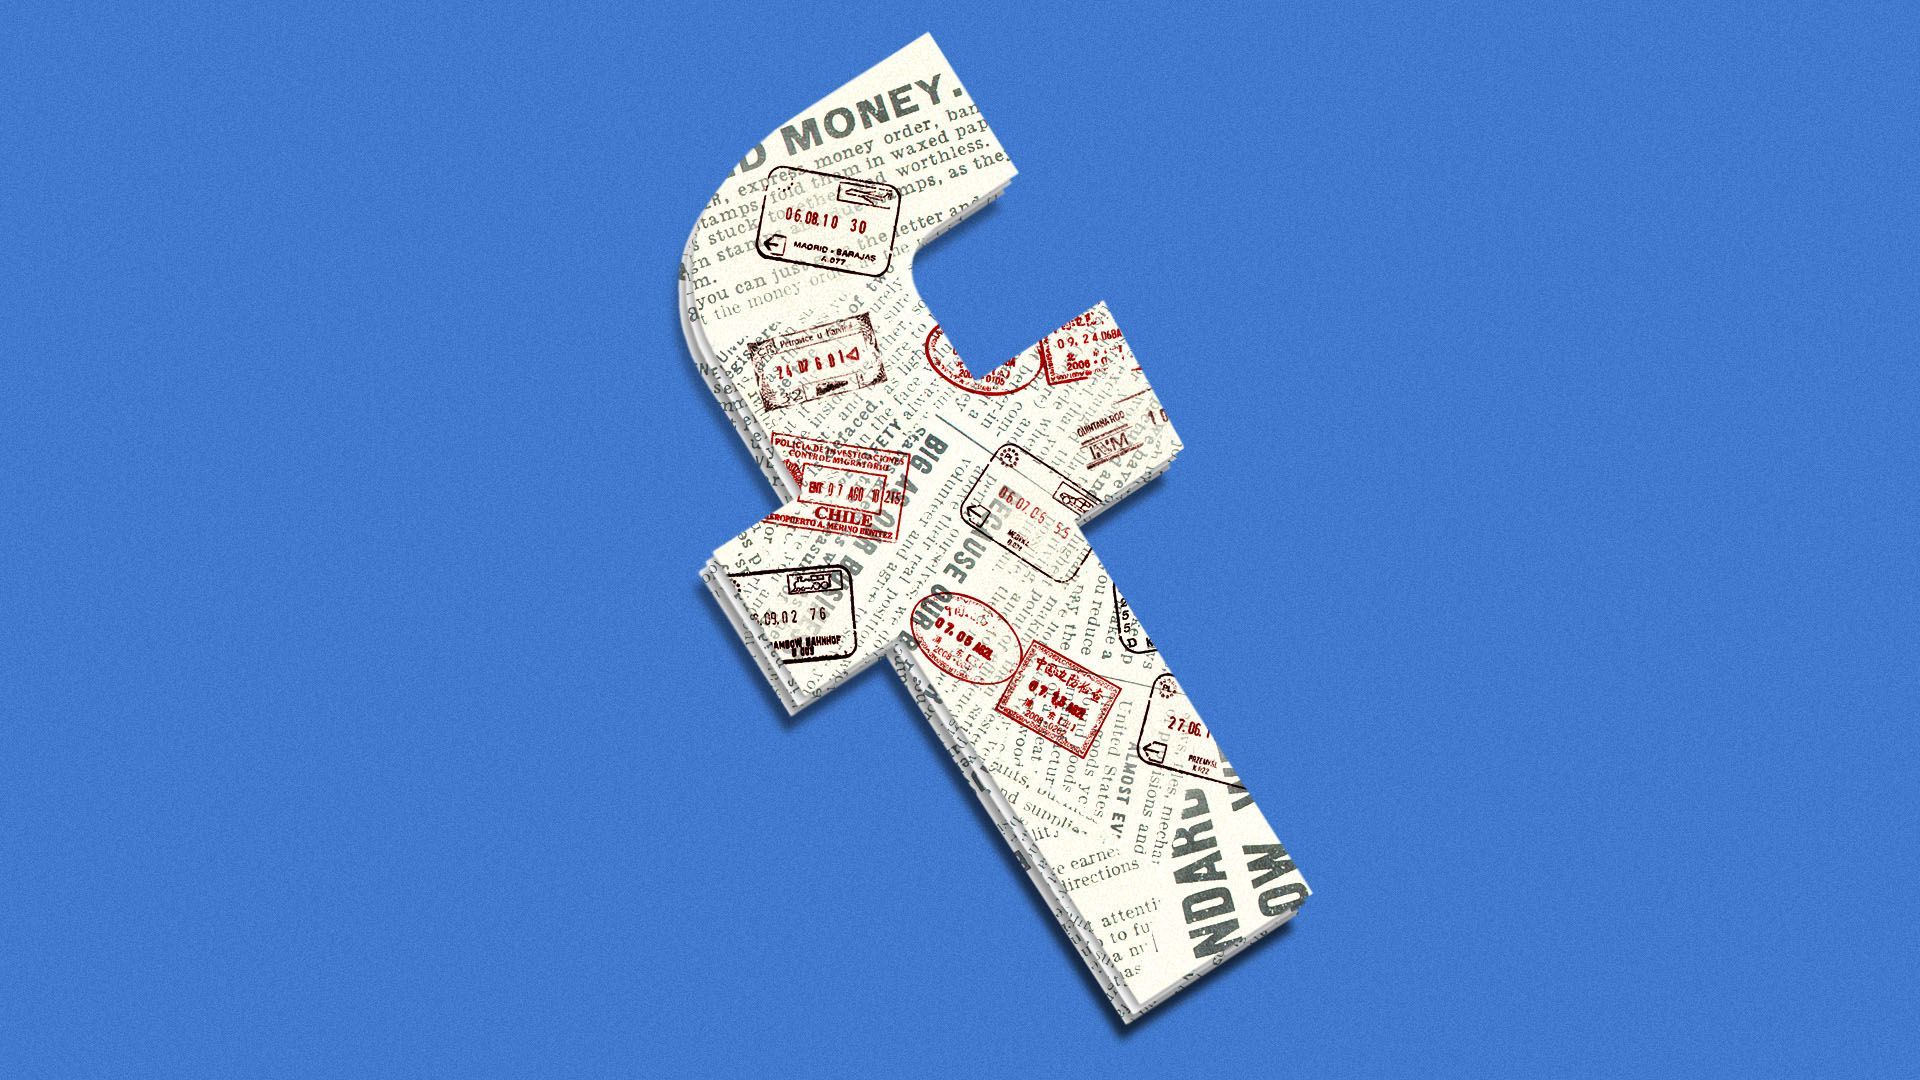 Illustration of the facebook logo as a newspaper covered in visa stamps